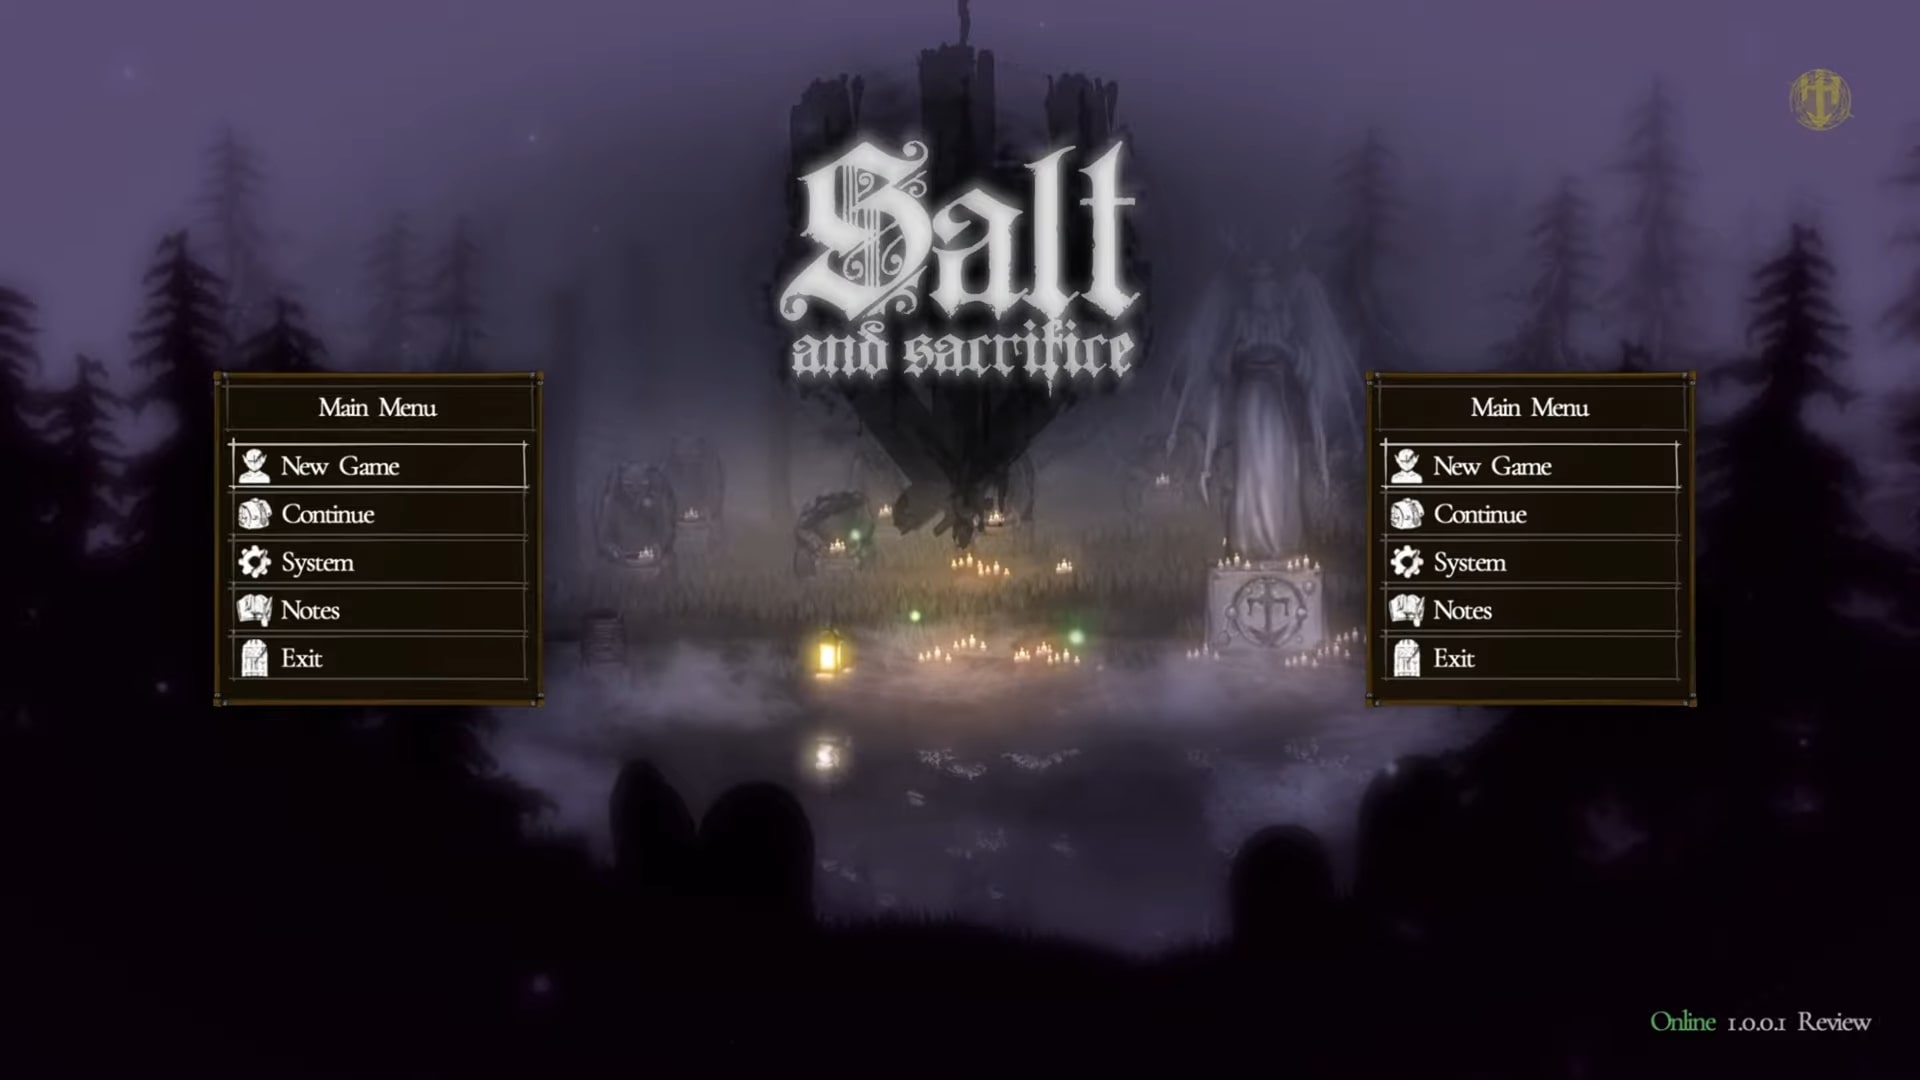 Local Co-op in Salt and Sacrifice